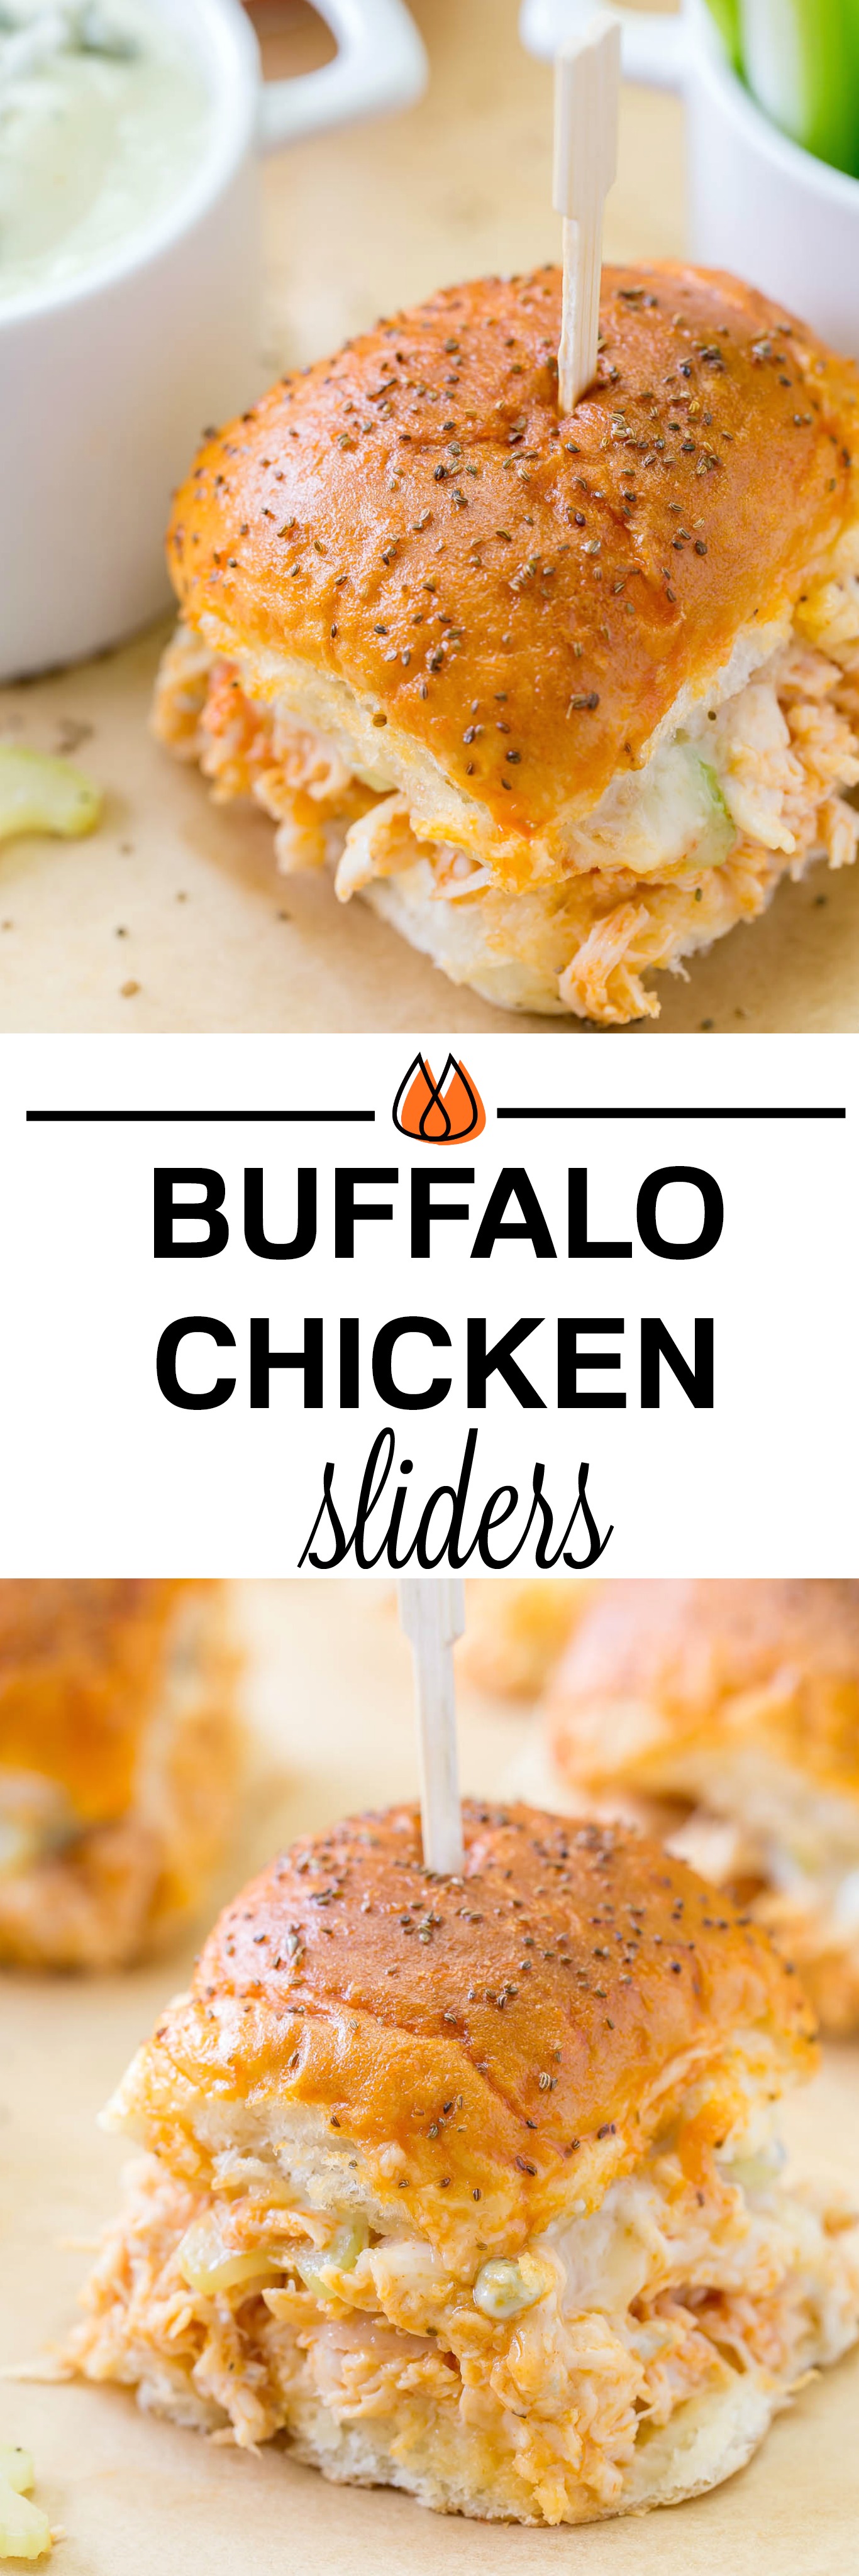 Game Day sliders - the best Buffalo Chicken Sliders